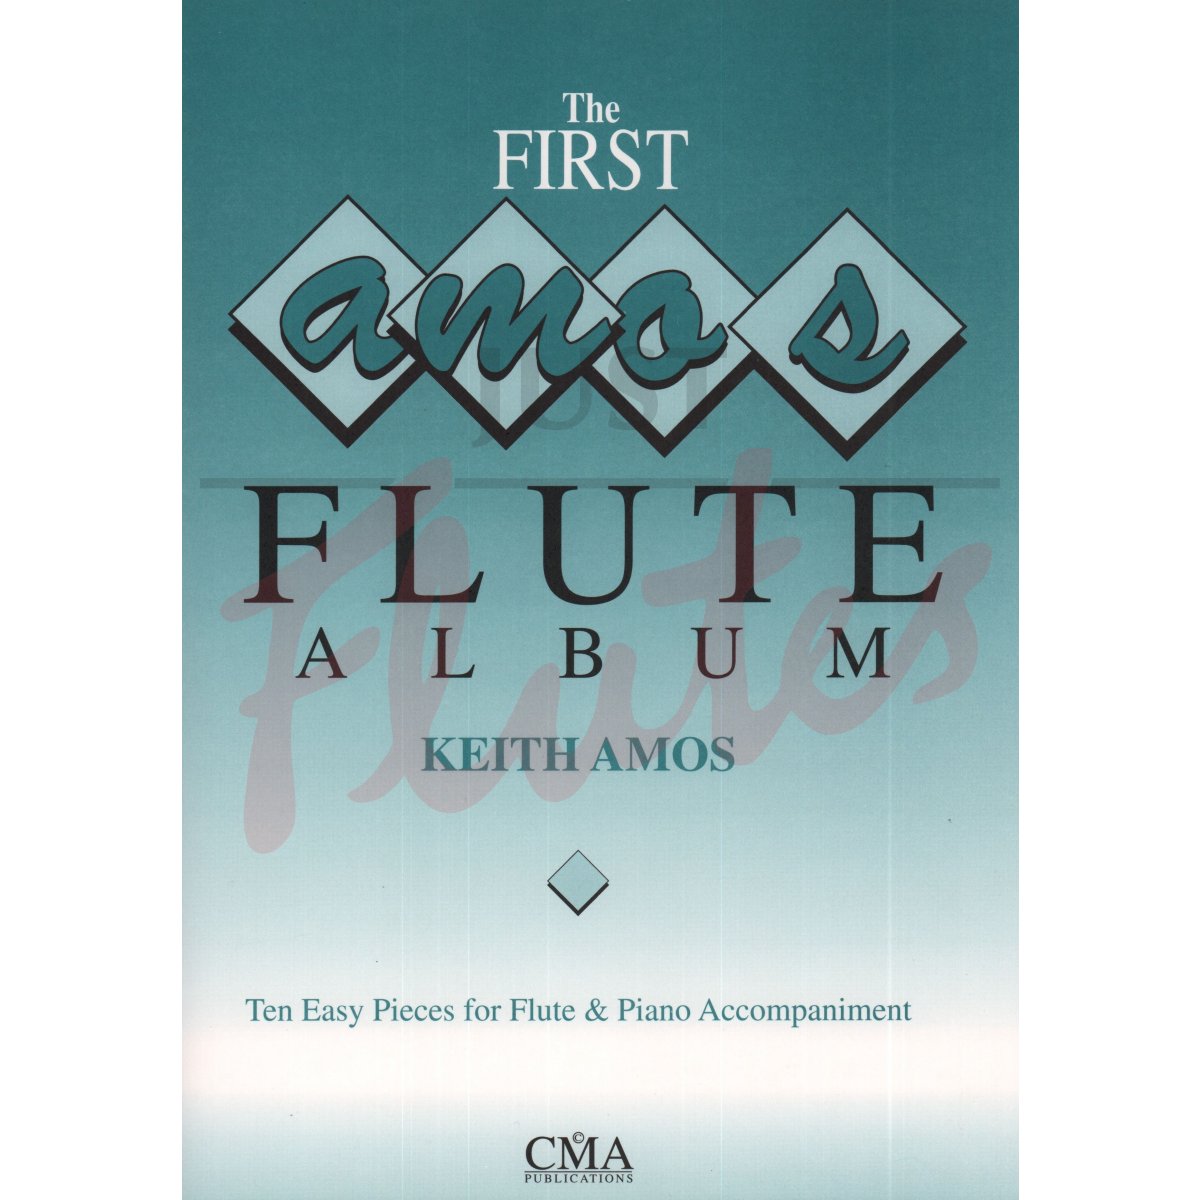 The First Amos Flute Album for Flute and Piano